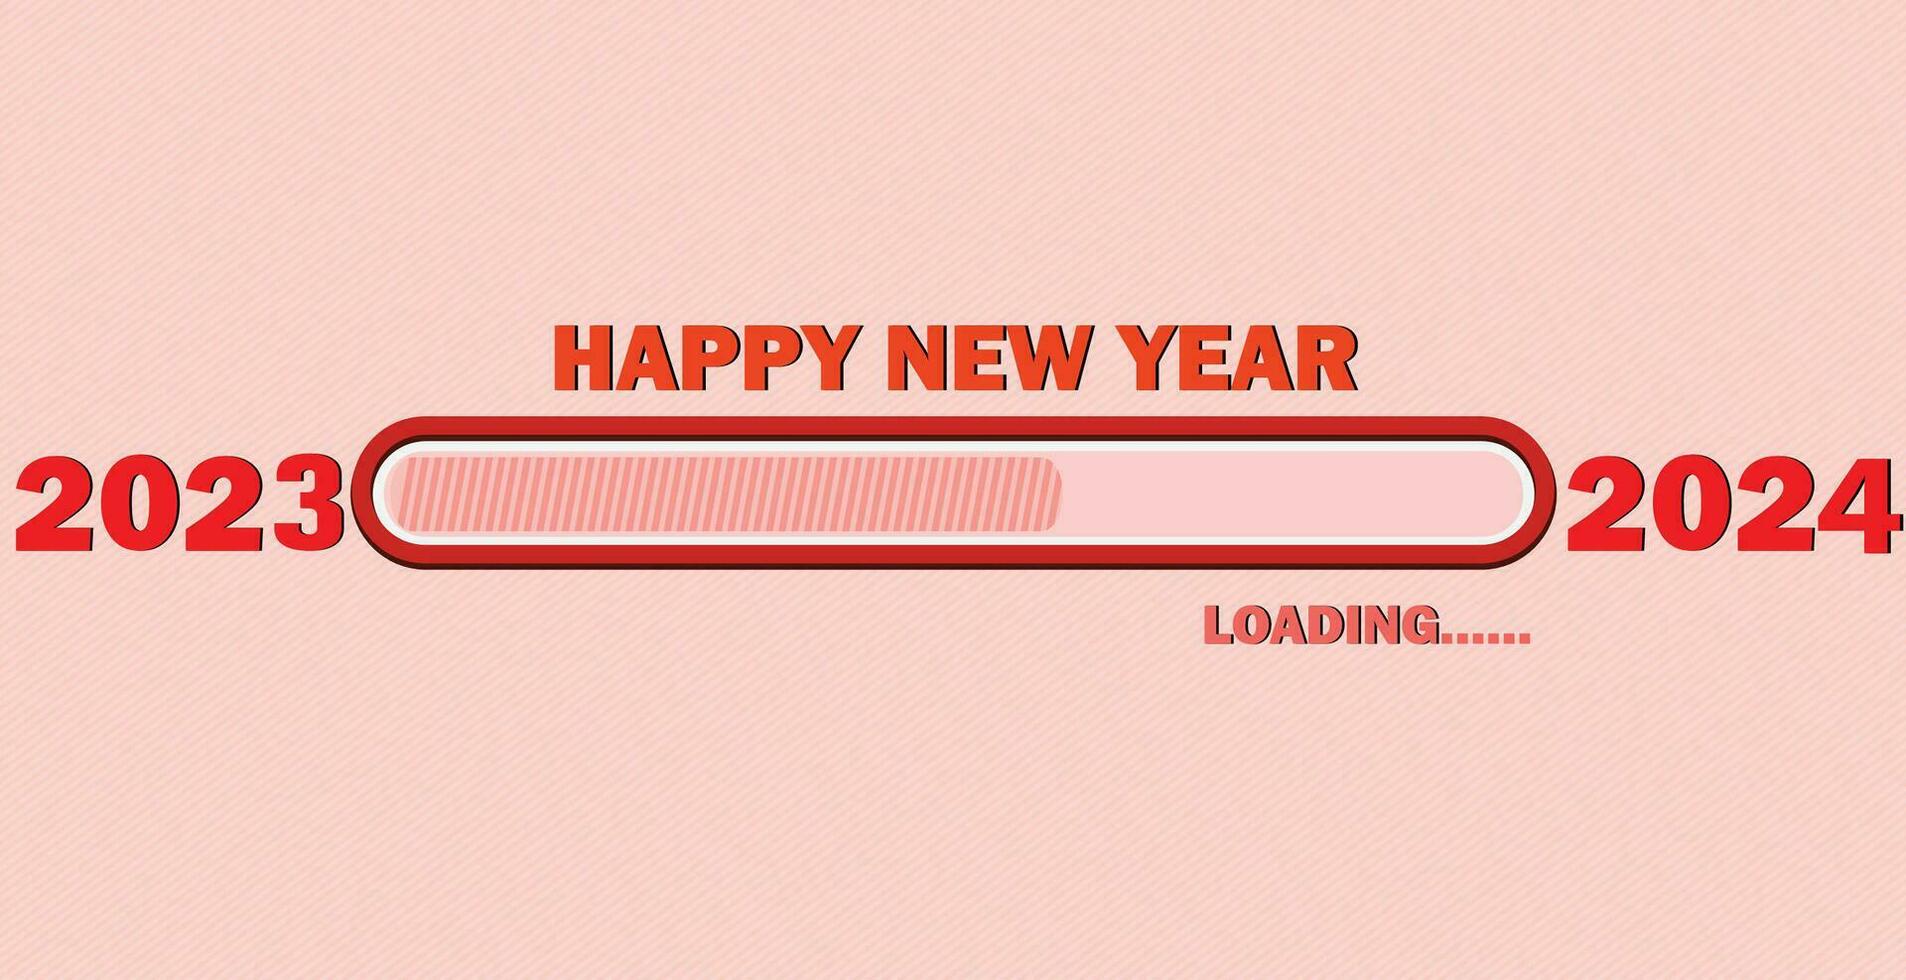 Vecter of loading with new year 2023 bar.Transfer Download to 2024 year.Digital data,circuit board, Scientific,technology.Vecter digital art and  new year 2024 concept. vector